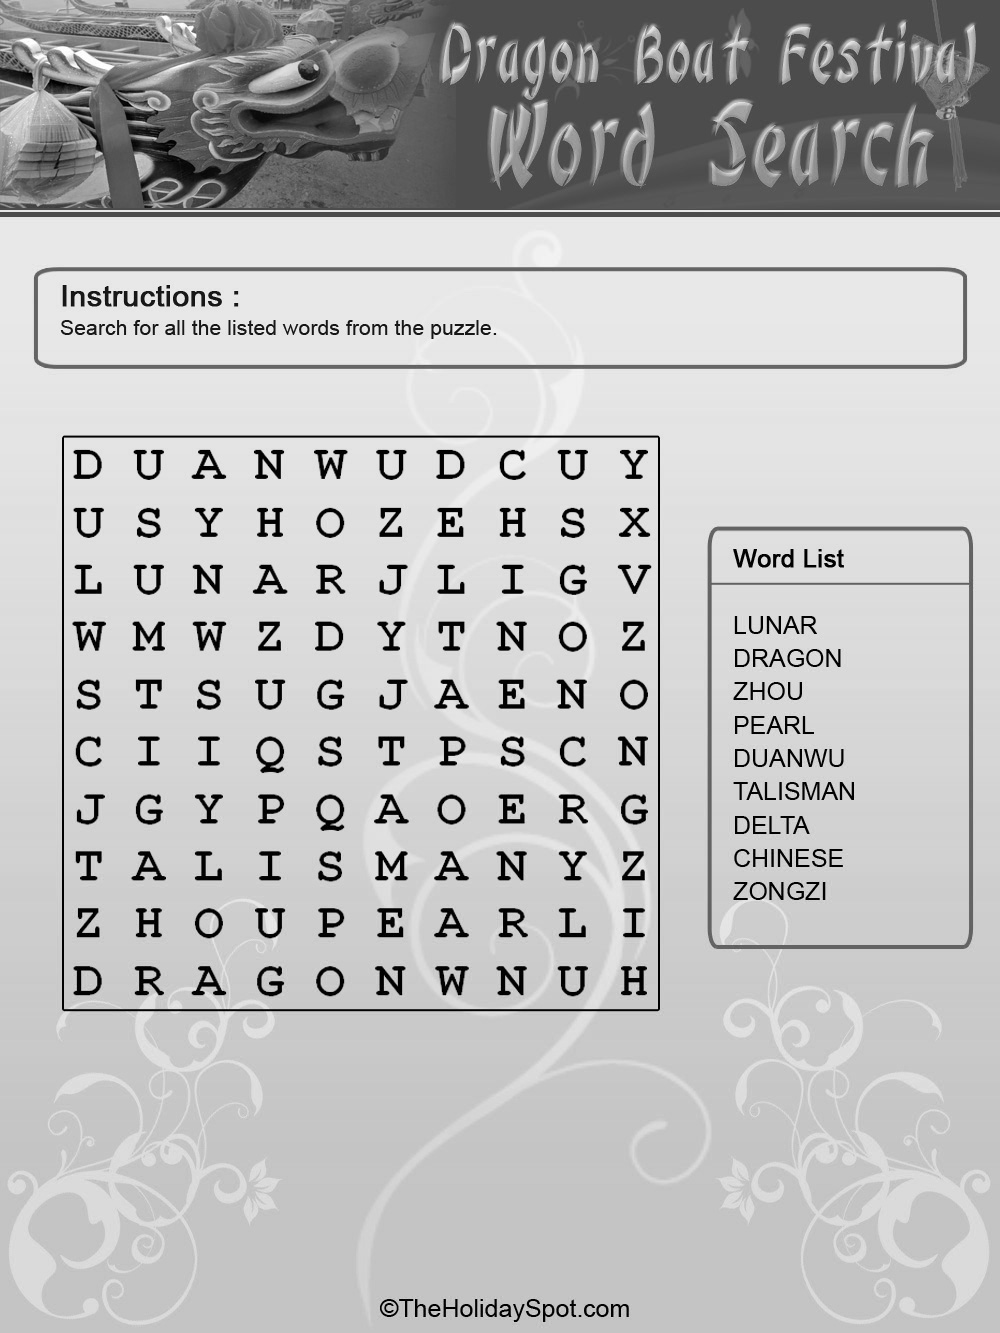 Dragon Boat Festival Black and White Word Search template